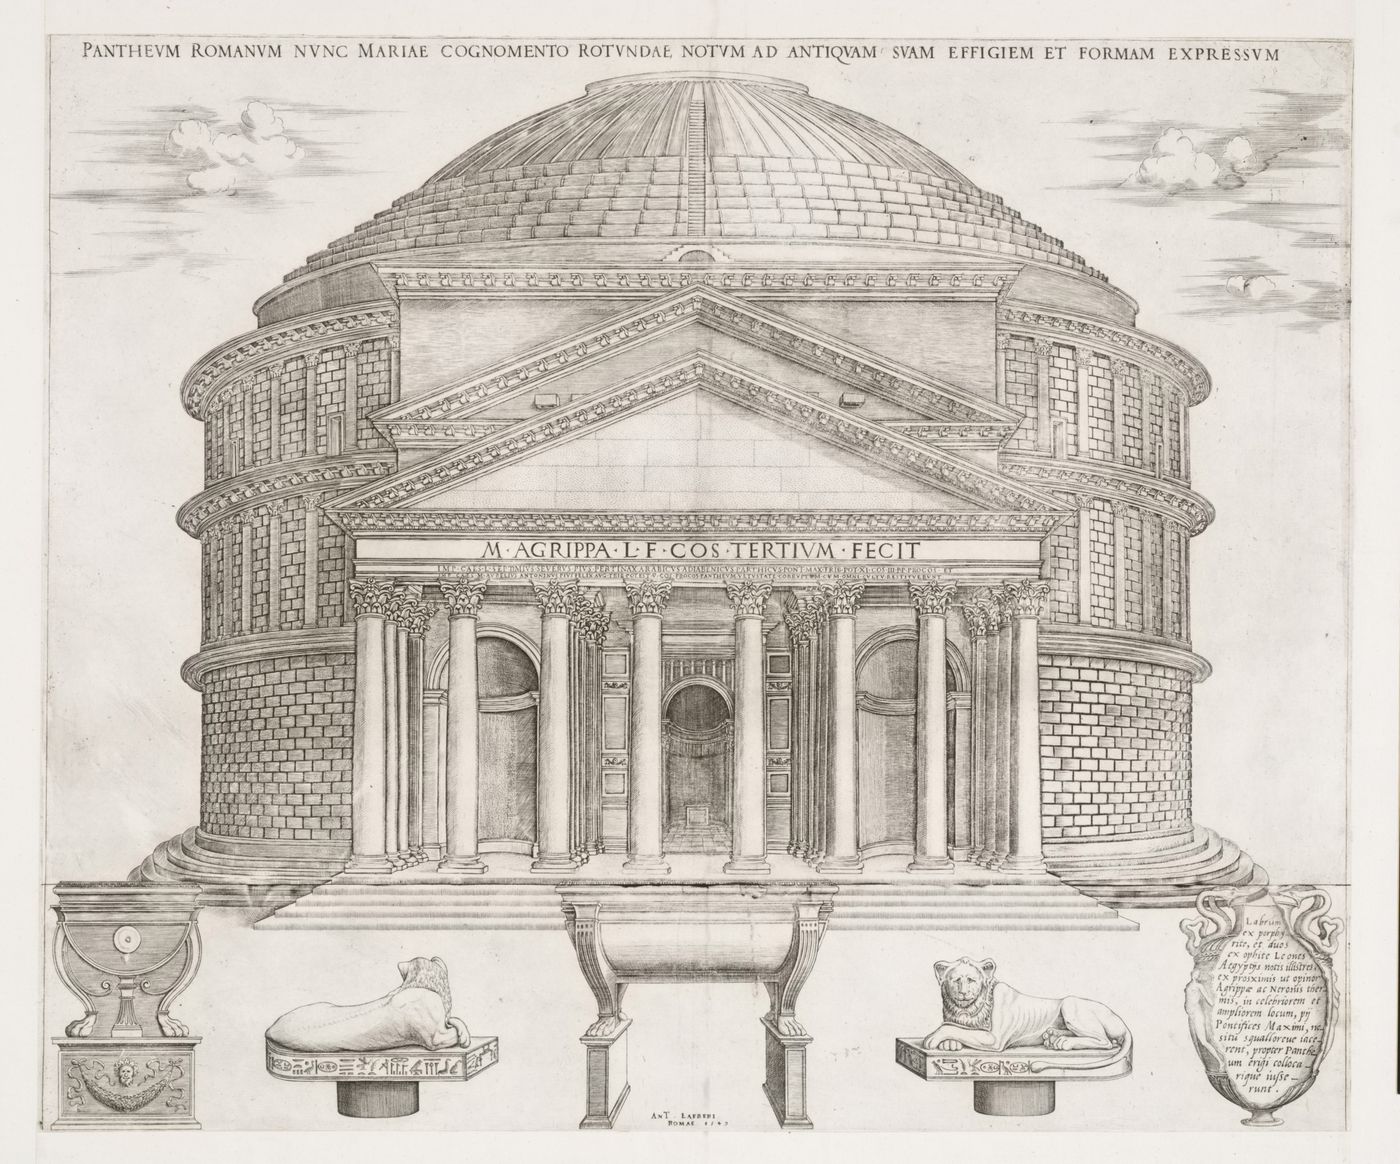 Perspective of the Pantheon, Rome, with sculptures in the foreground